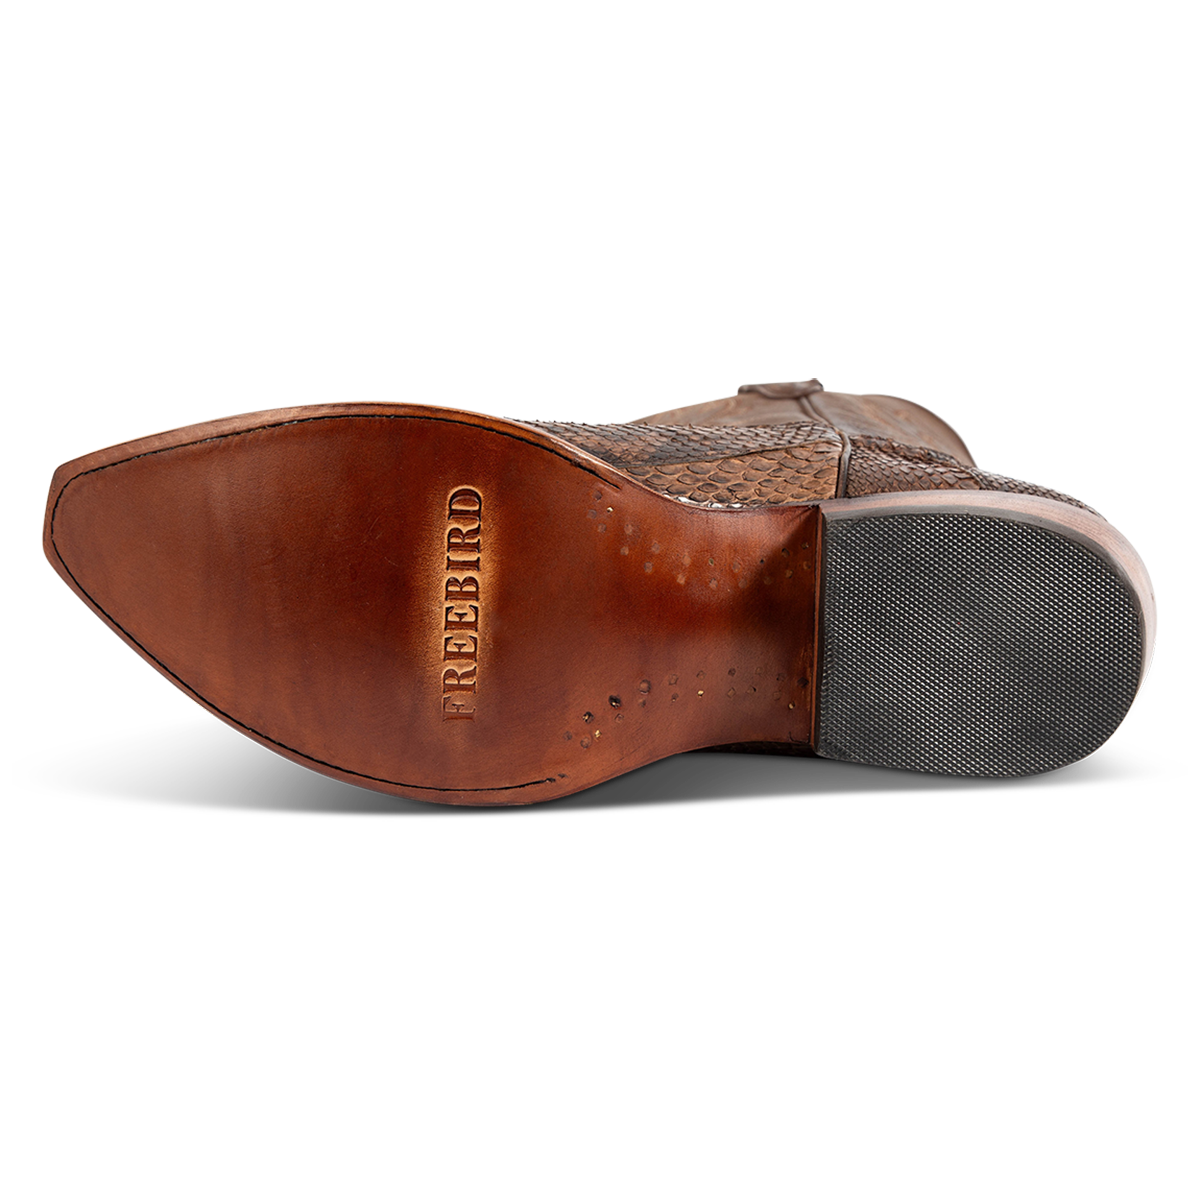 Leather sole imprinted with FREEBIRD on men's Marshall brown python leather western cowboy boot